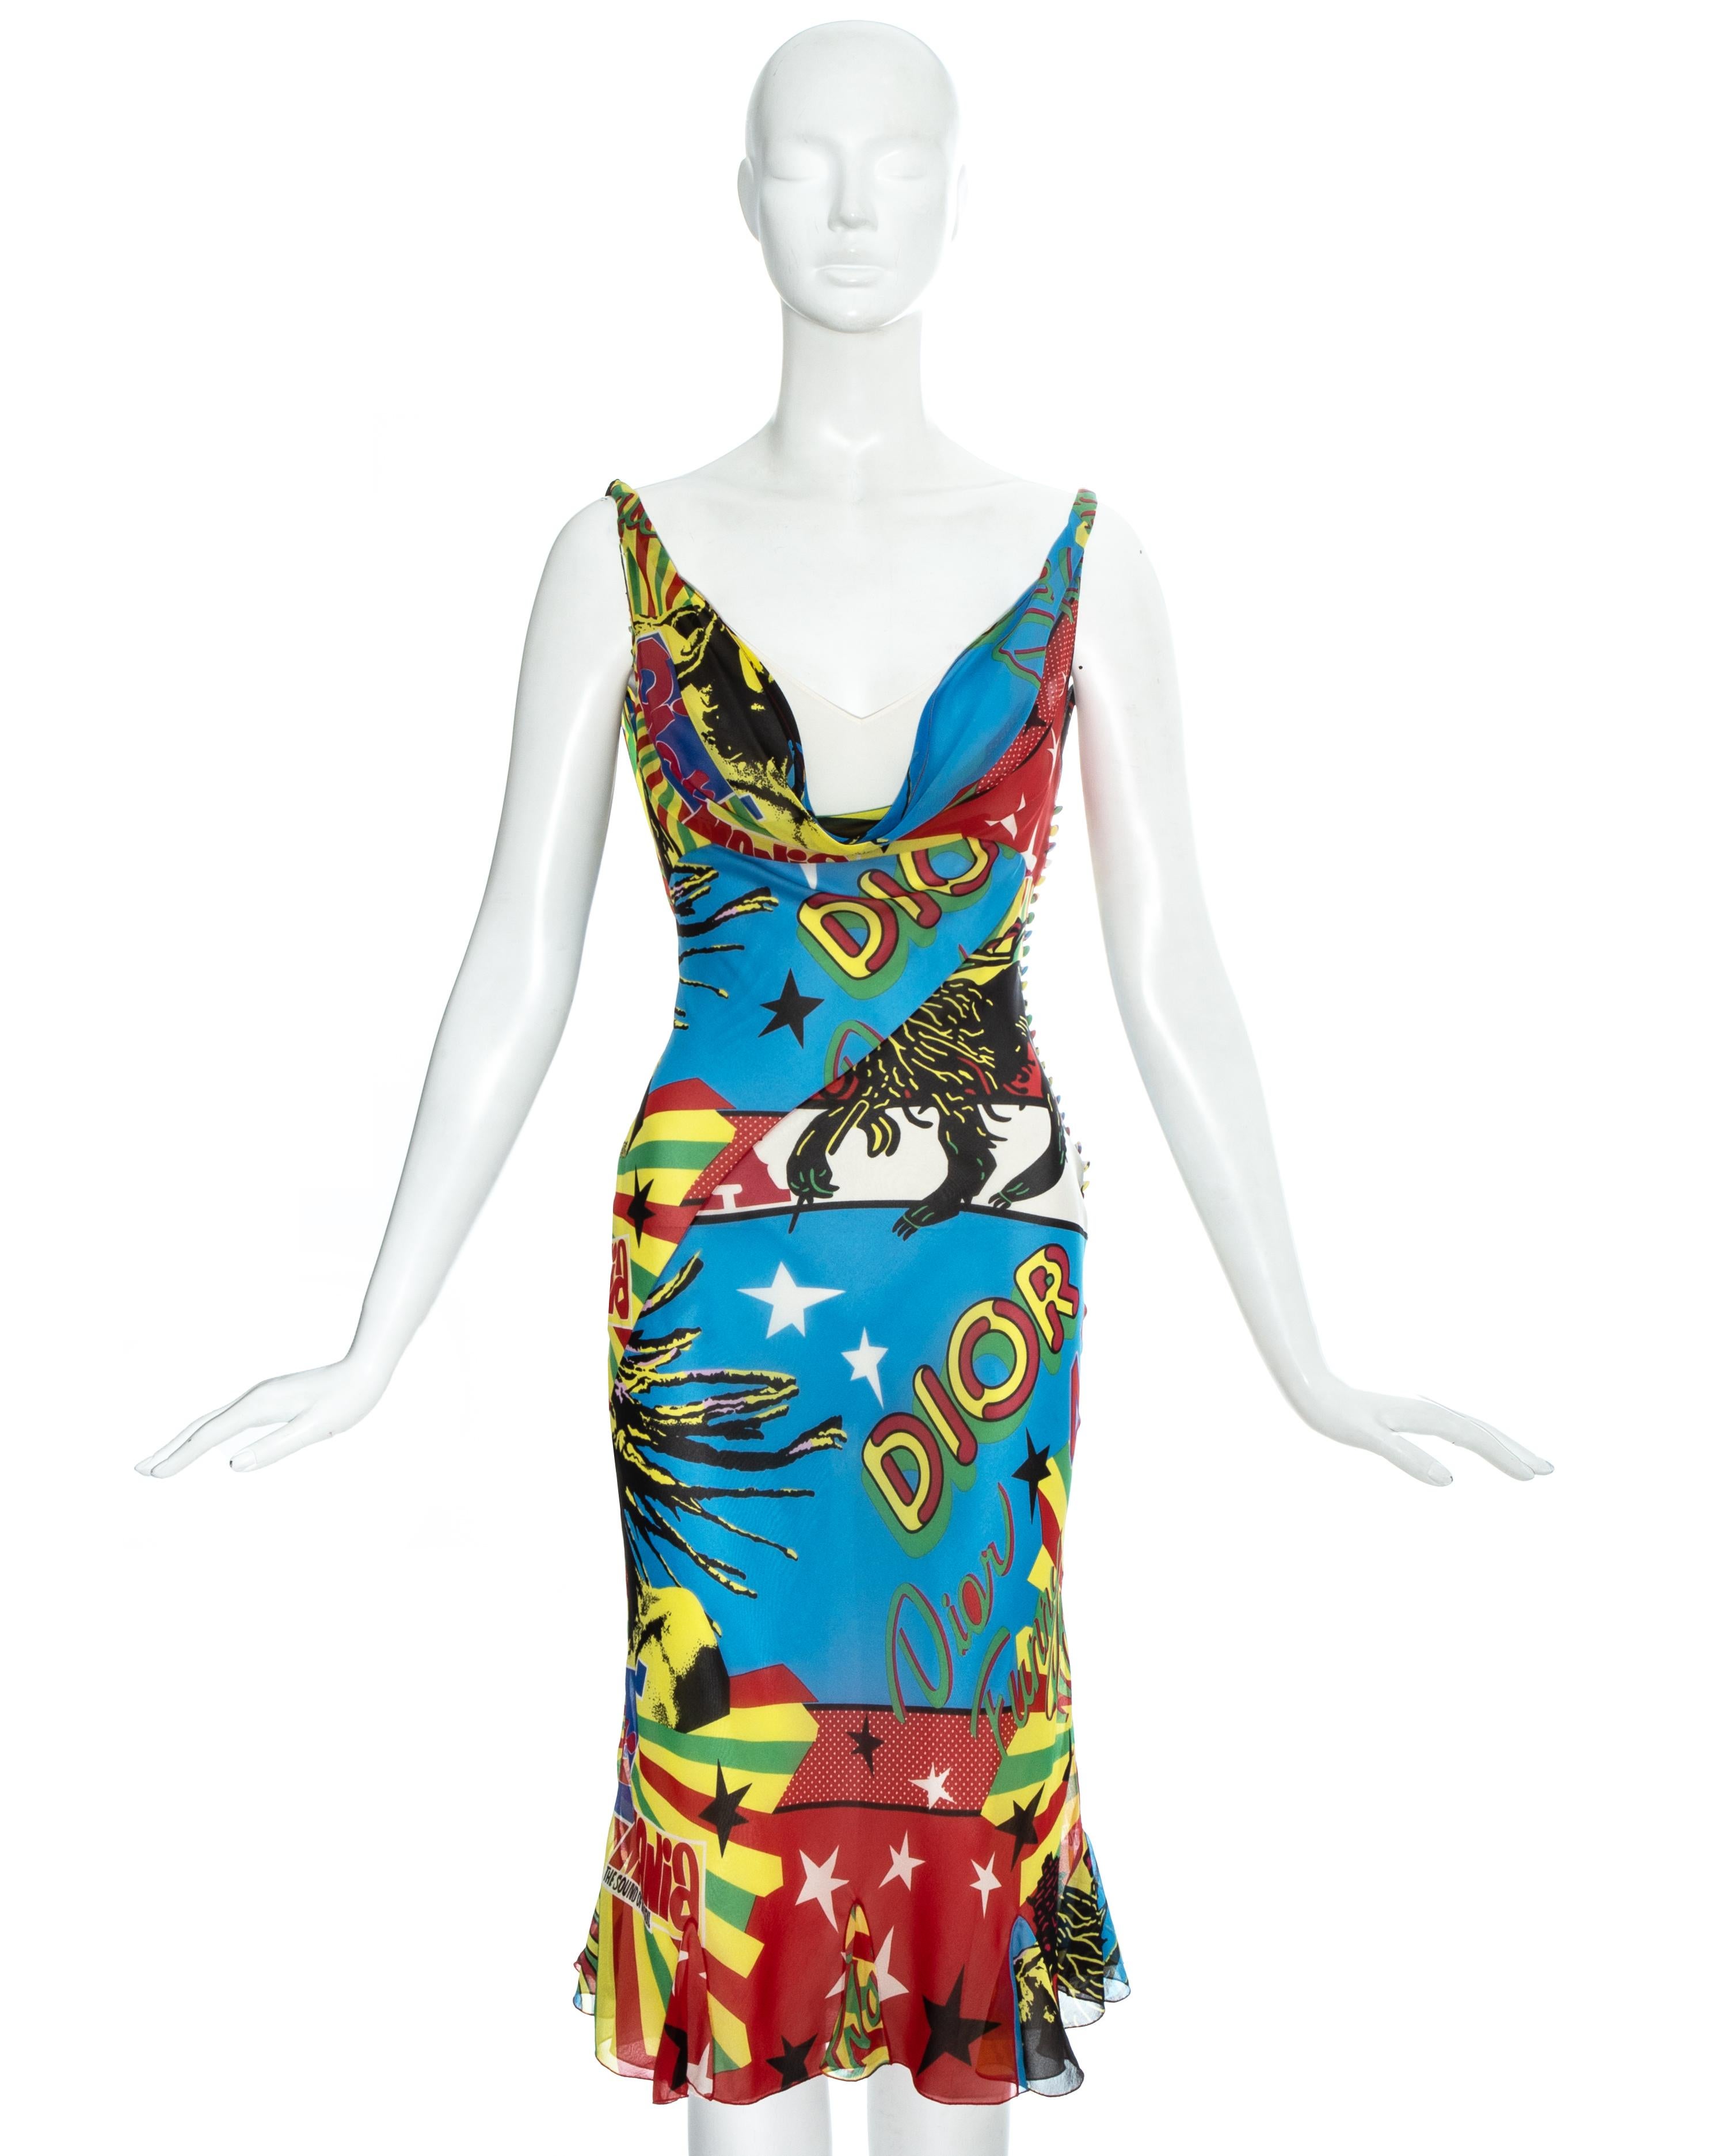 Christian Dior by John Galliano silk chiffon mid-length evening dress with signature 'Rasta Mania' print, draped cleavage, open back, fabric button fastenings and attached cream silk slip dress  

Spring-Summer 2004